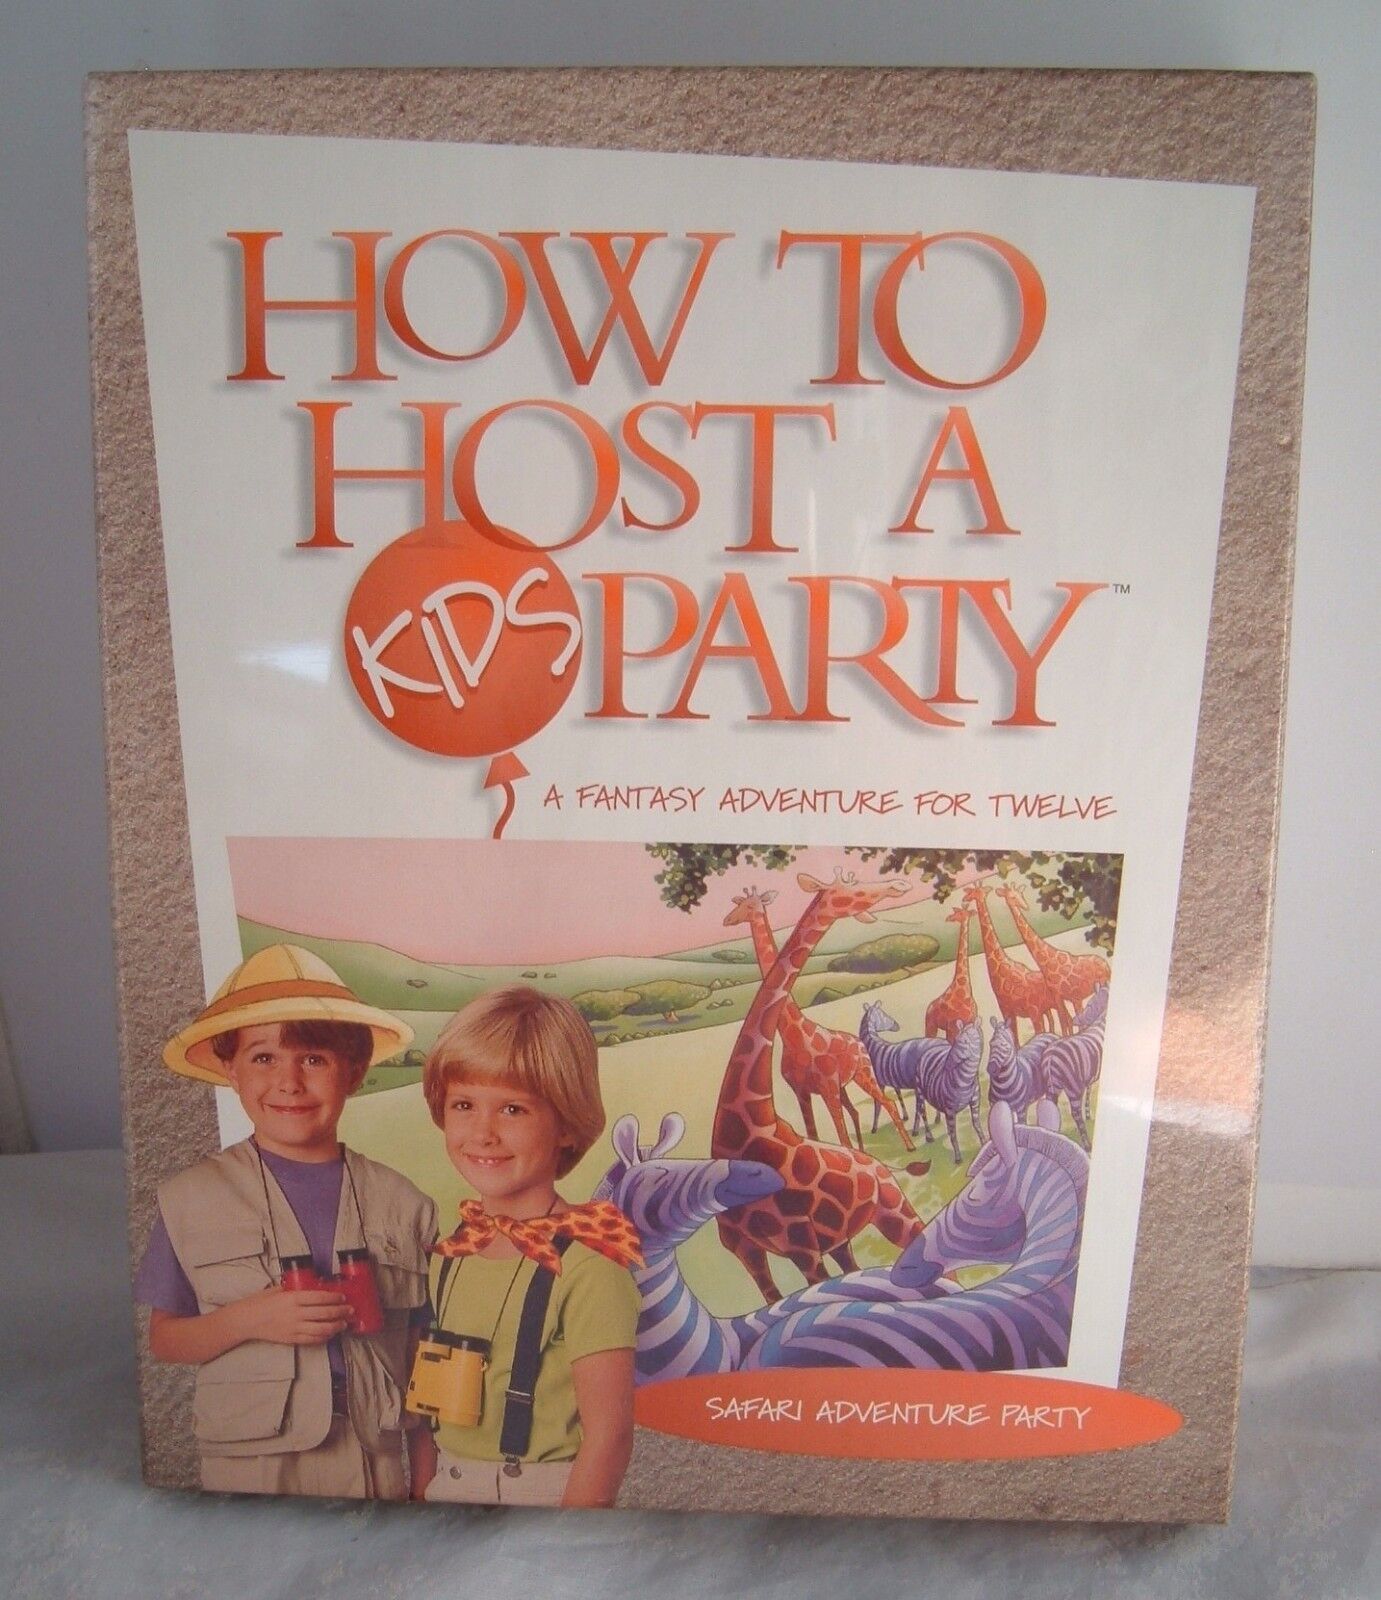 Vtg 90s Safari Adventure for Twelve How to Host a KIDS Party 1997 NOS - $14.80